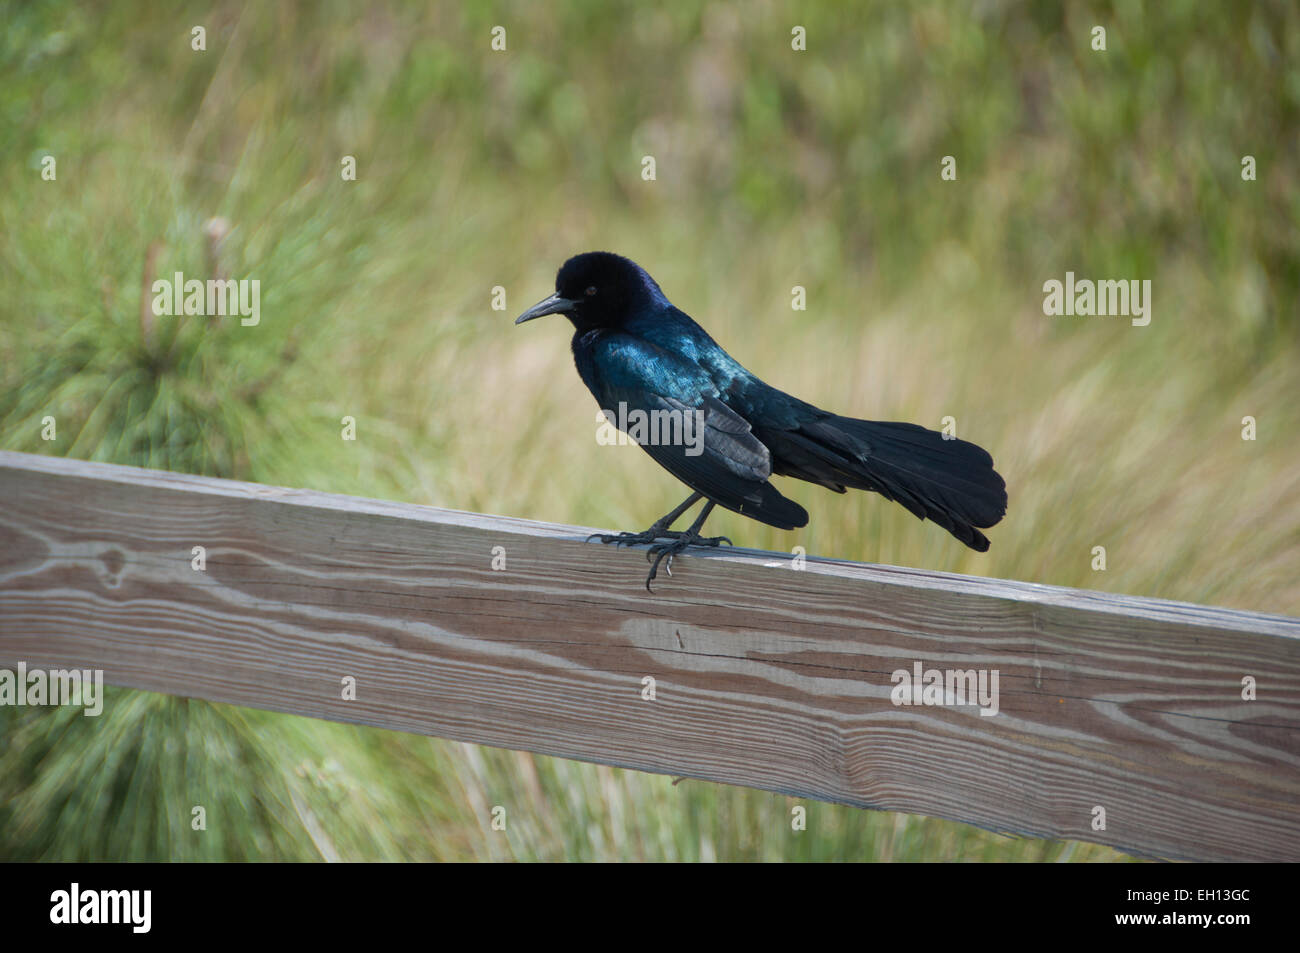 Quiscalus quiscula common grackle in the Celery Fields of Sarasota, Florida perched on a fence Stock Photo